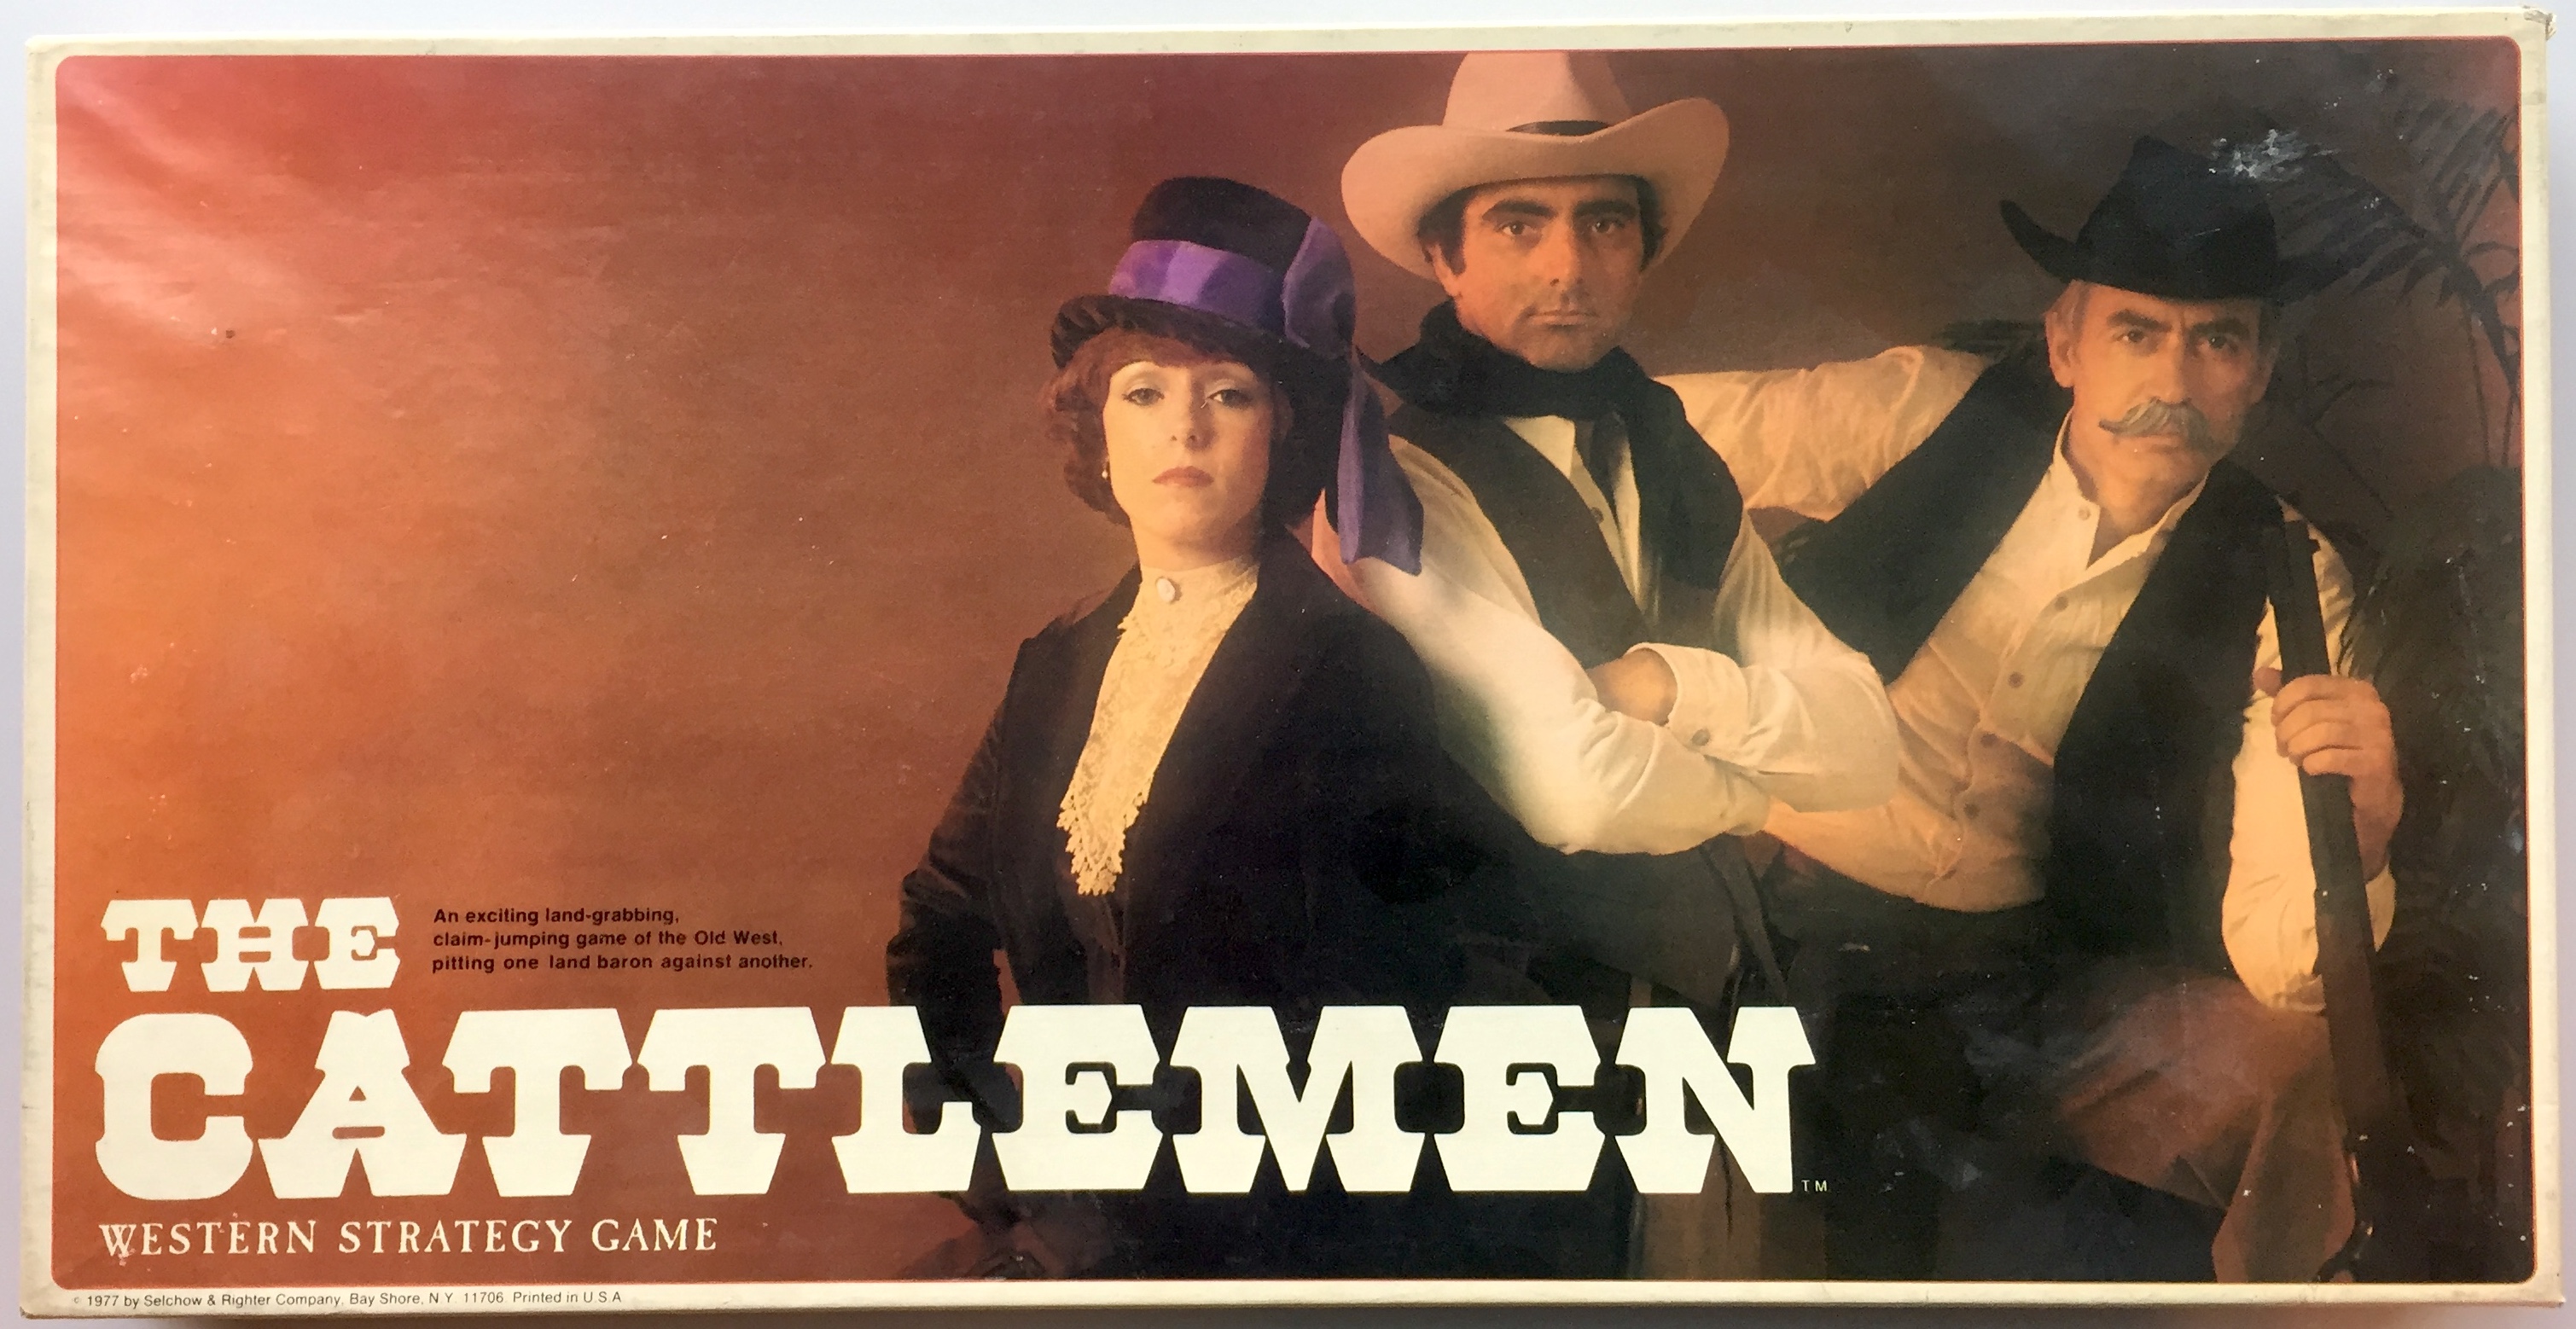 The Cattlemen: Western Strategy Game